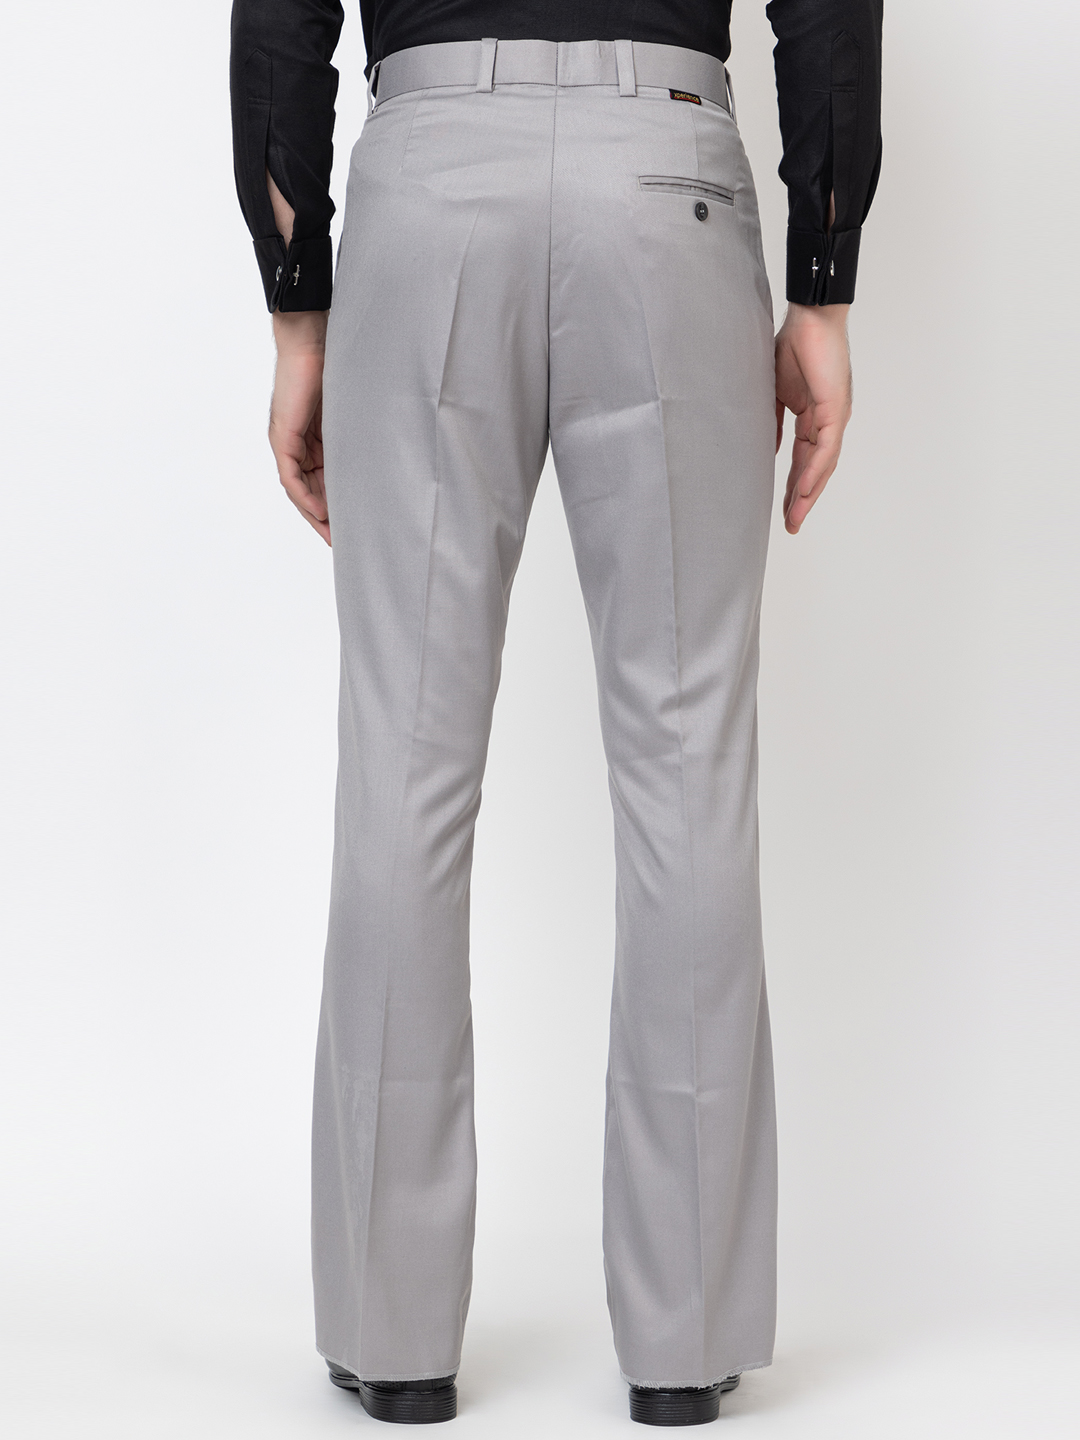 SELECTED HOMME Slim Fit Suit Trousers, Light Grey at John Lewis & Partners